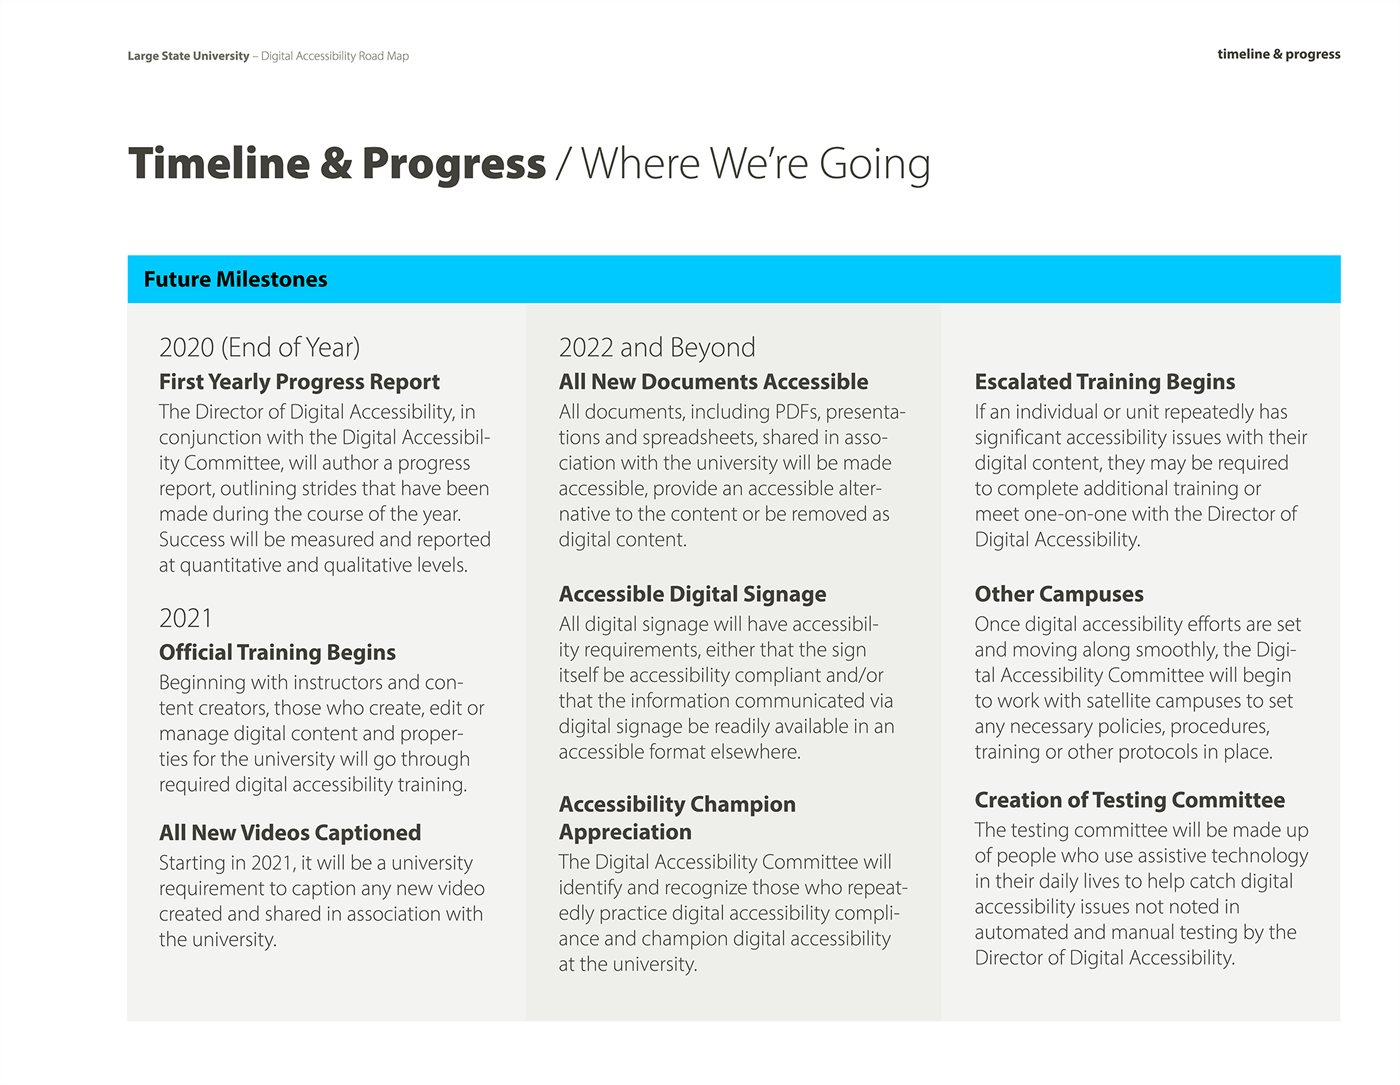 Timeline & Progress page from the Digital Accessibility Roadmap showing Future Milestones, projecting from 2020 (End of Year) to 2022 and Beyond to ensure long term success.